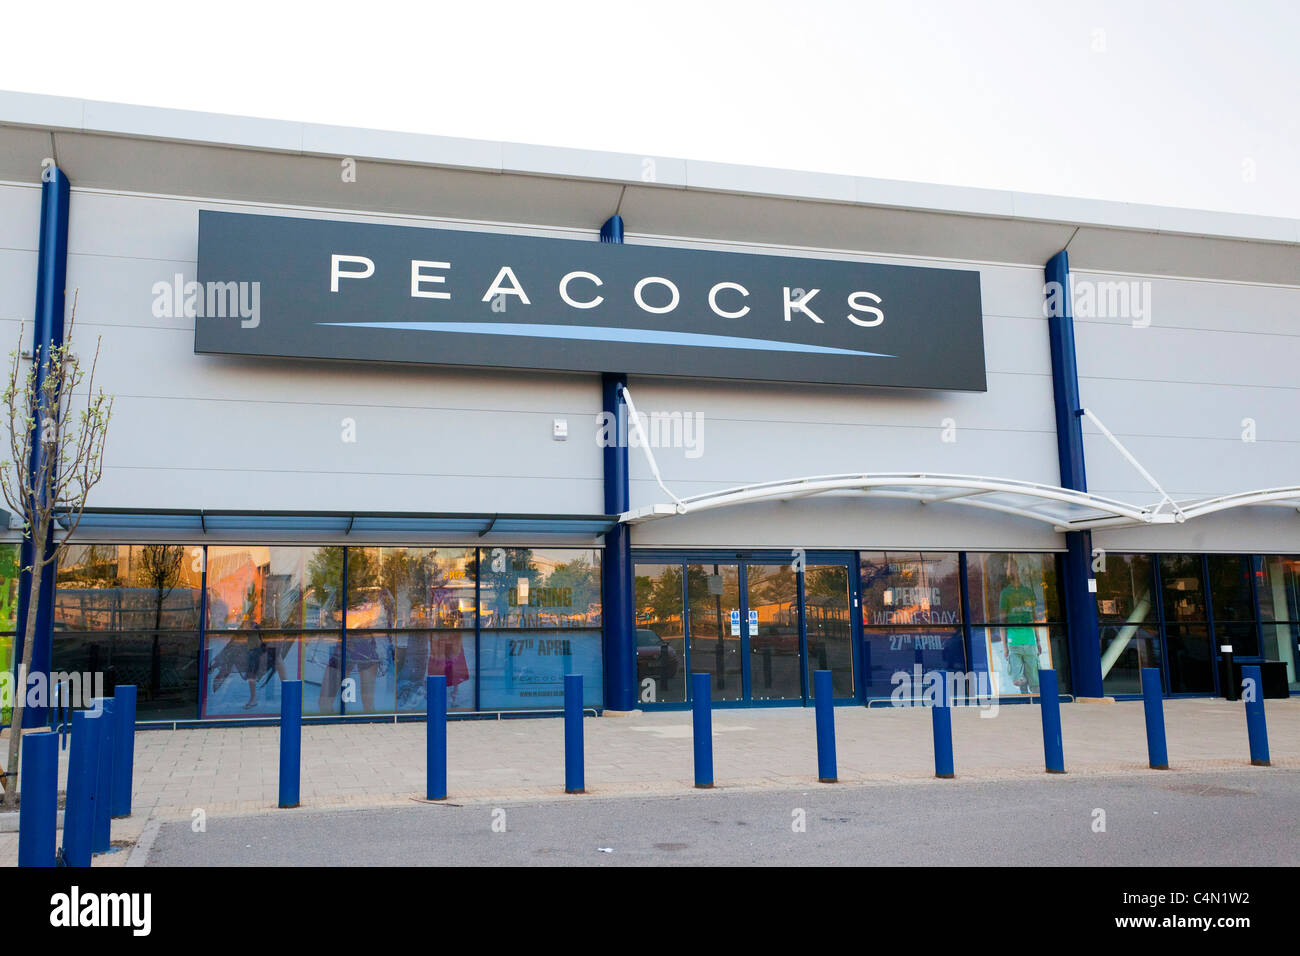 Peacocks clothing store in UK Stock Photo